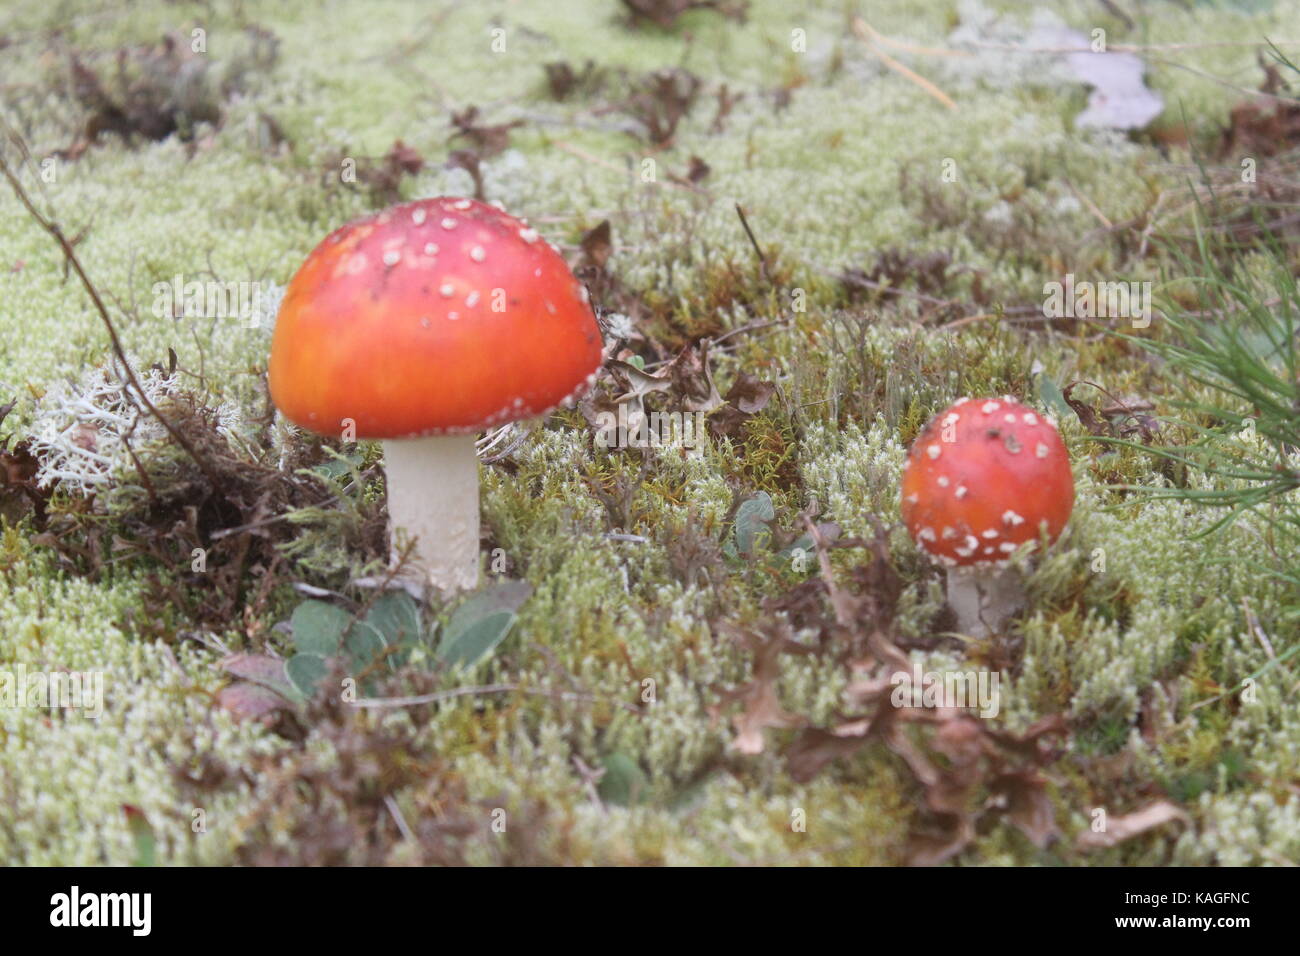 beautiful bright red hat agaric toxic mushroom grow on moss in autumn forest Stock Photo